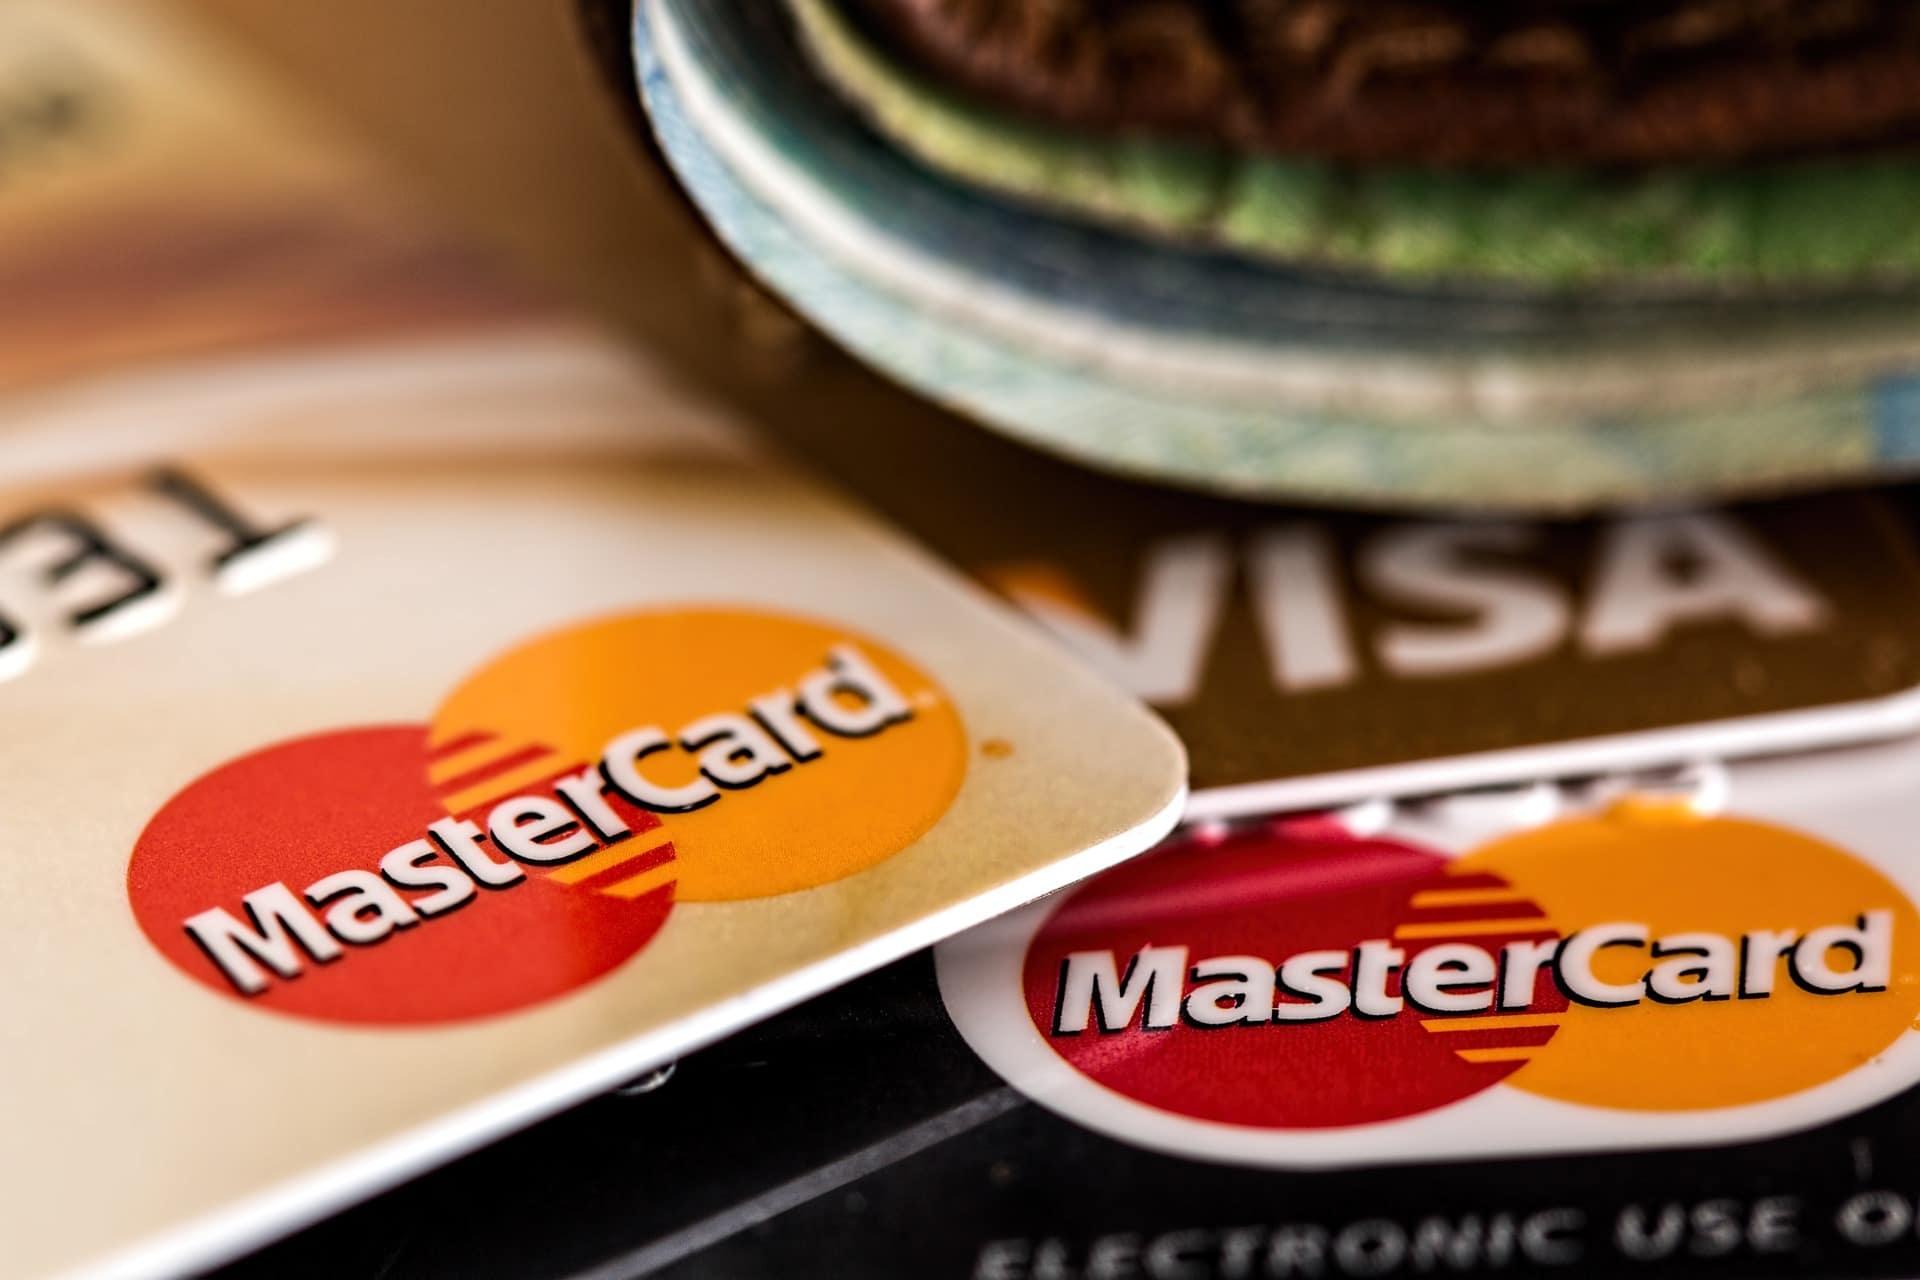 Mastercard: An ATM card, A payment card issued by a financial institution, Famous banking products. 1920x1280 HD Wallpaper.